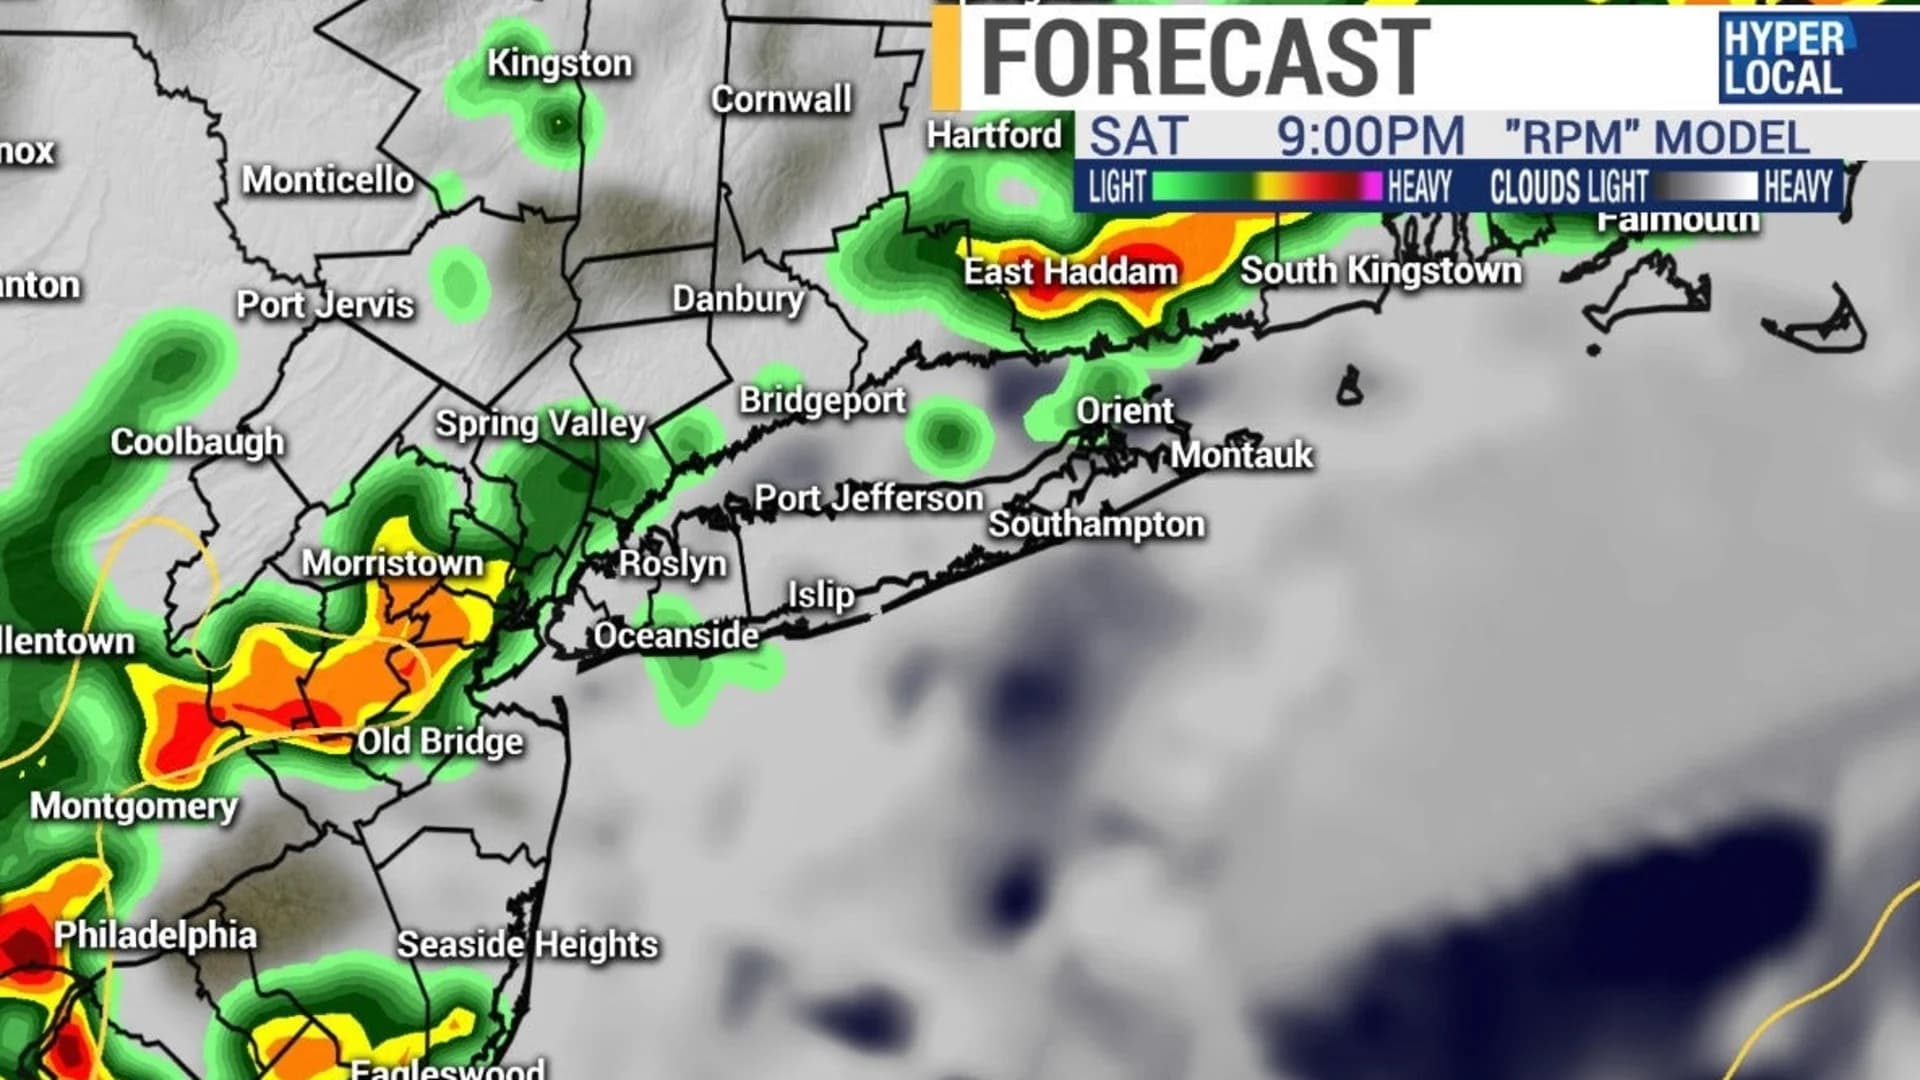 Showers and storms sweep over parts of LI with downpours, gusty winds